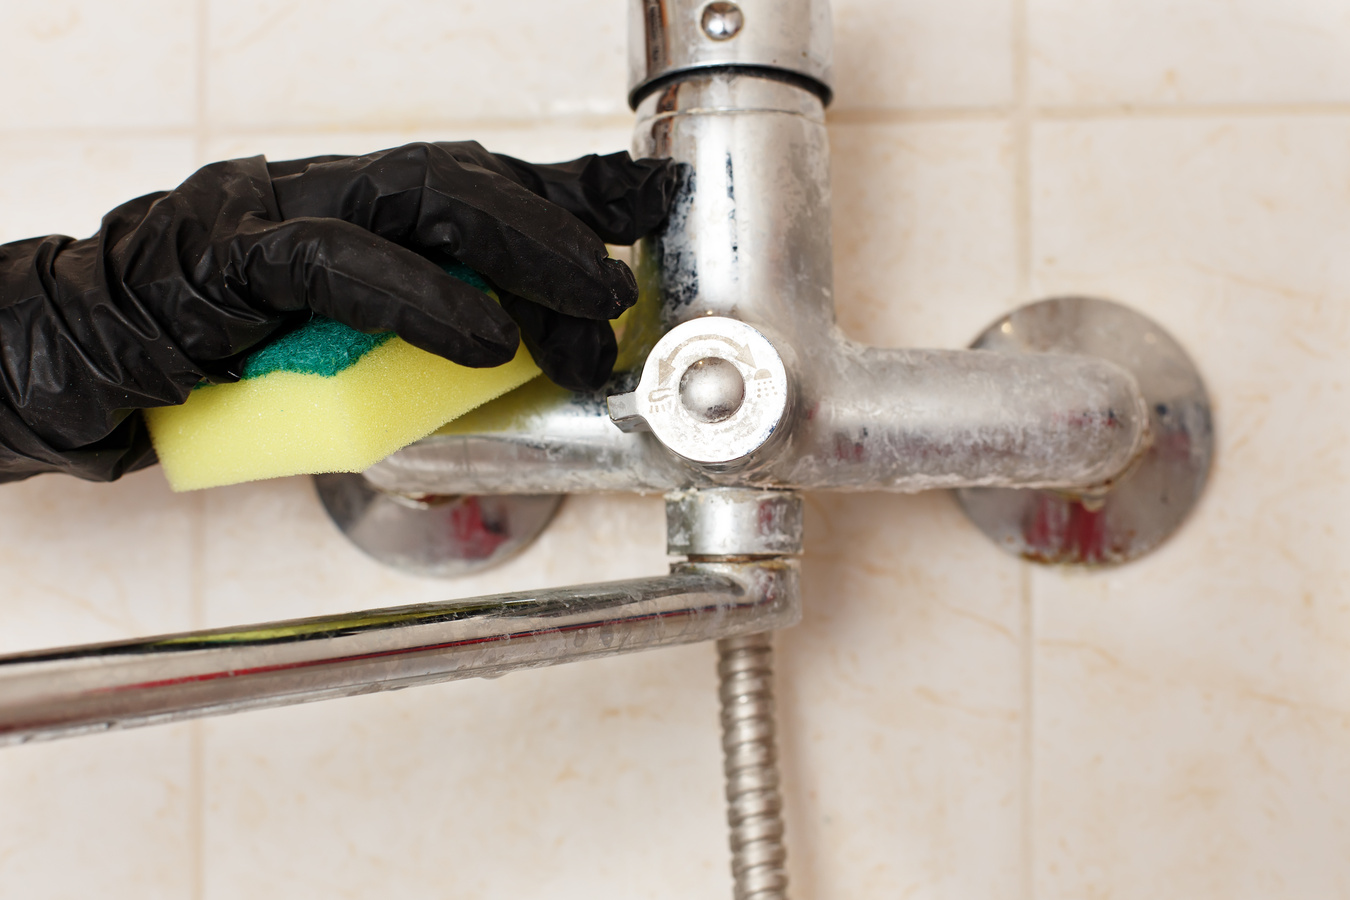 Limescale crust on bathroom mixer faucet. Hands in disposable ru